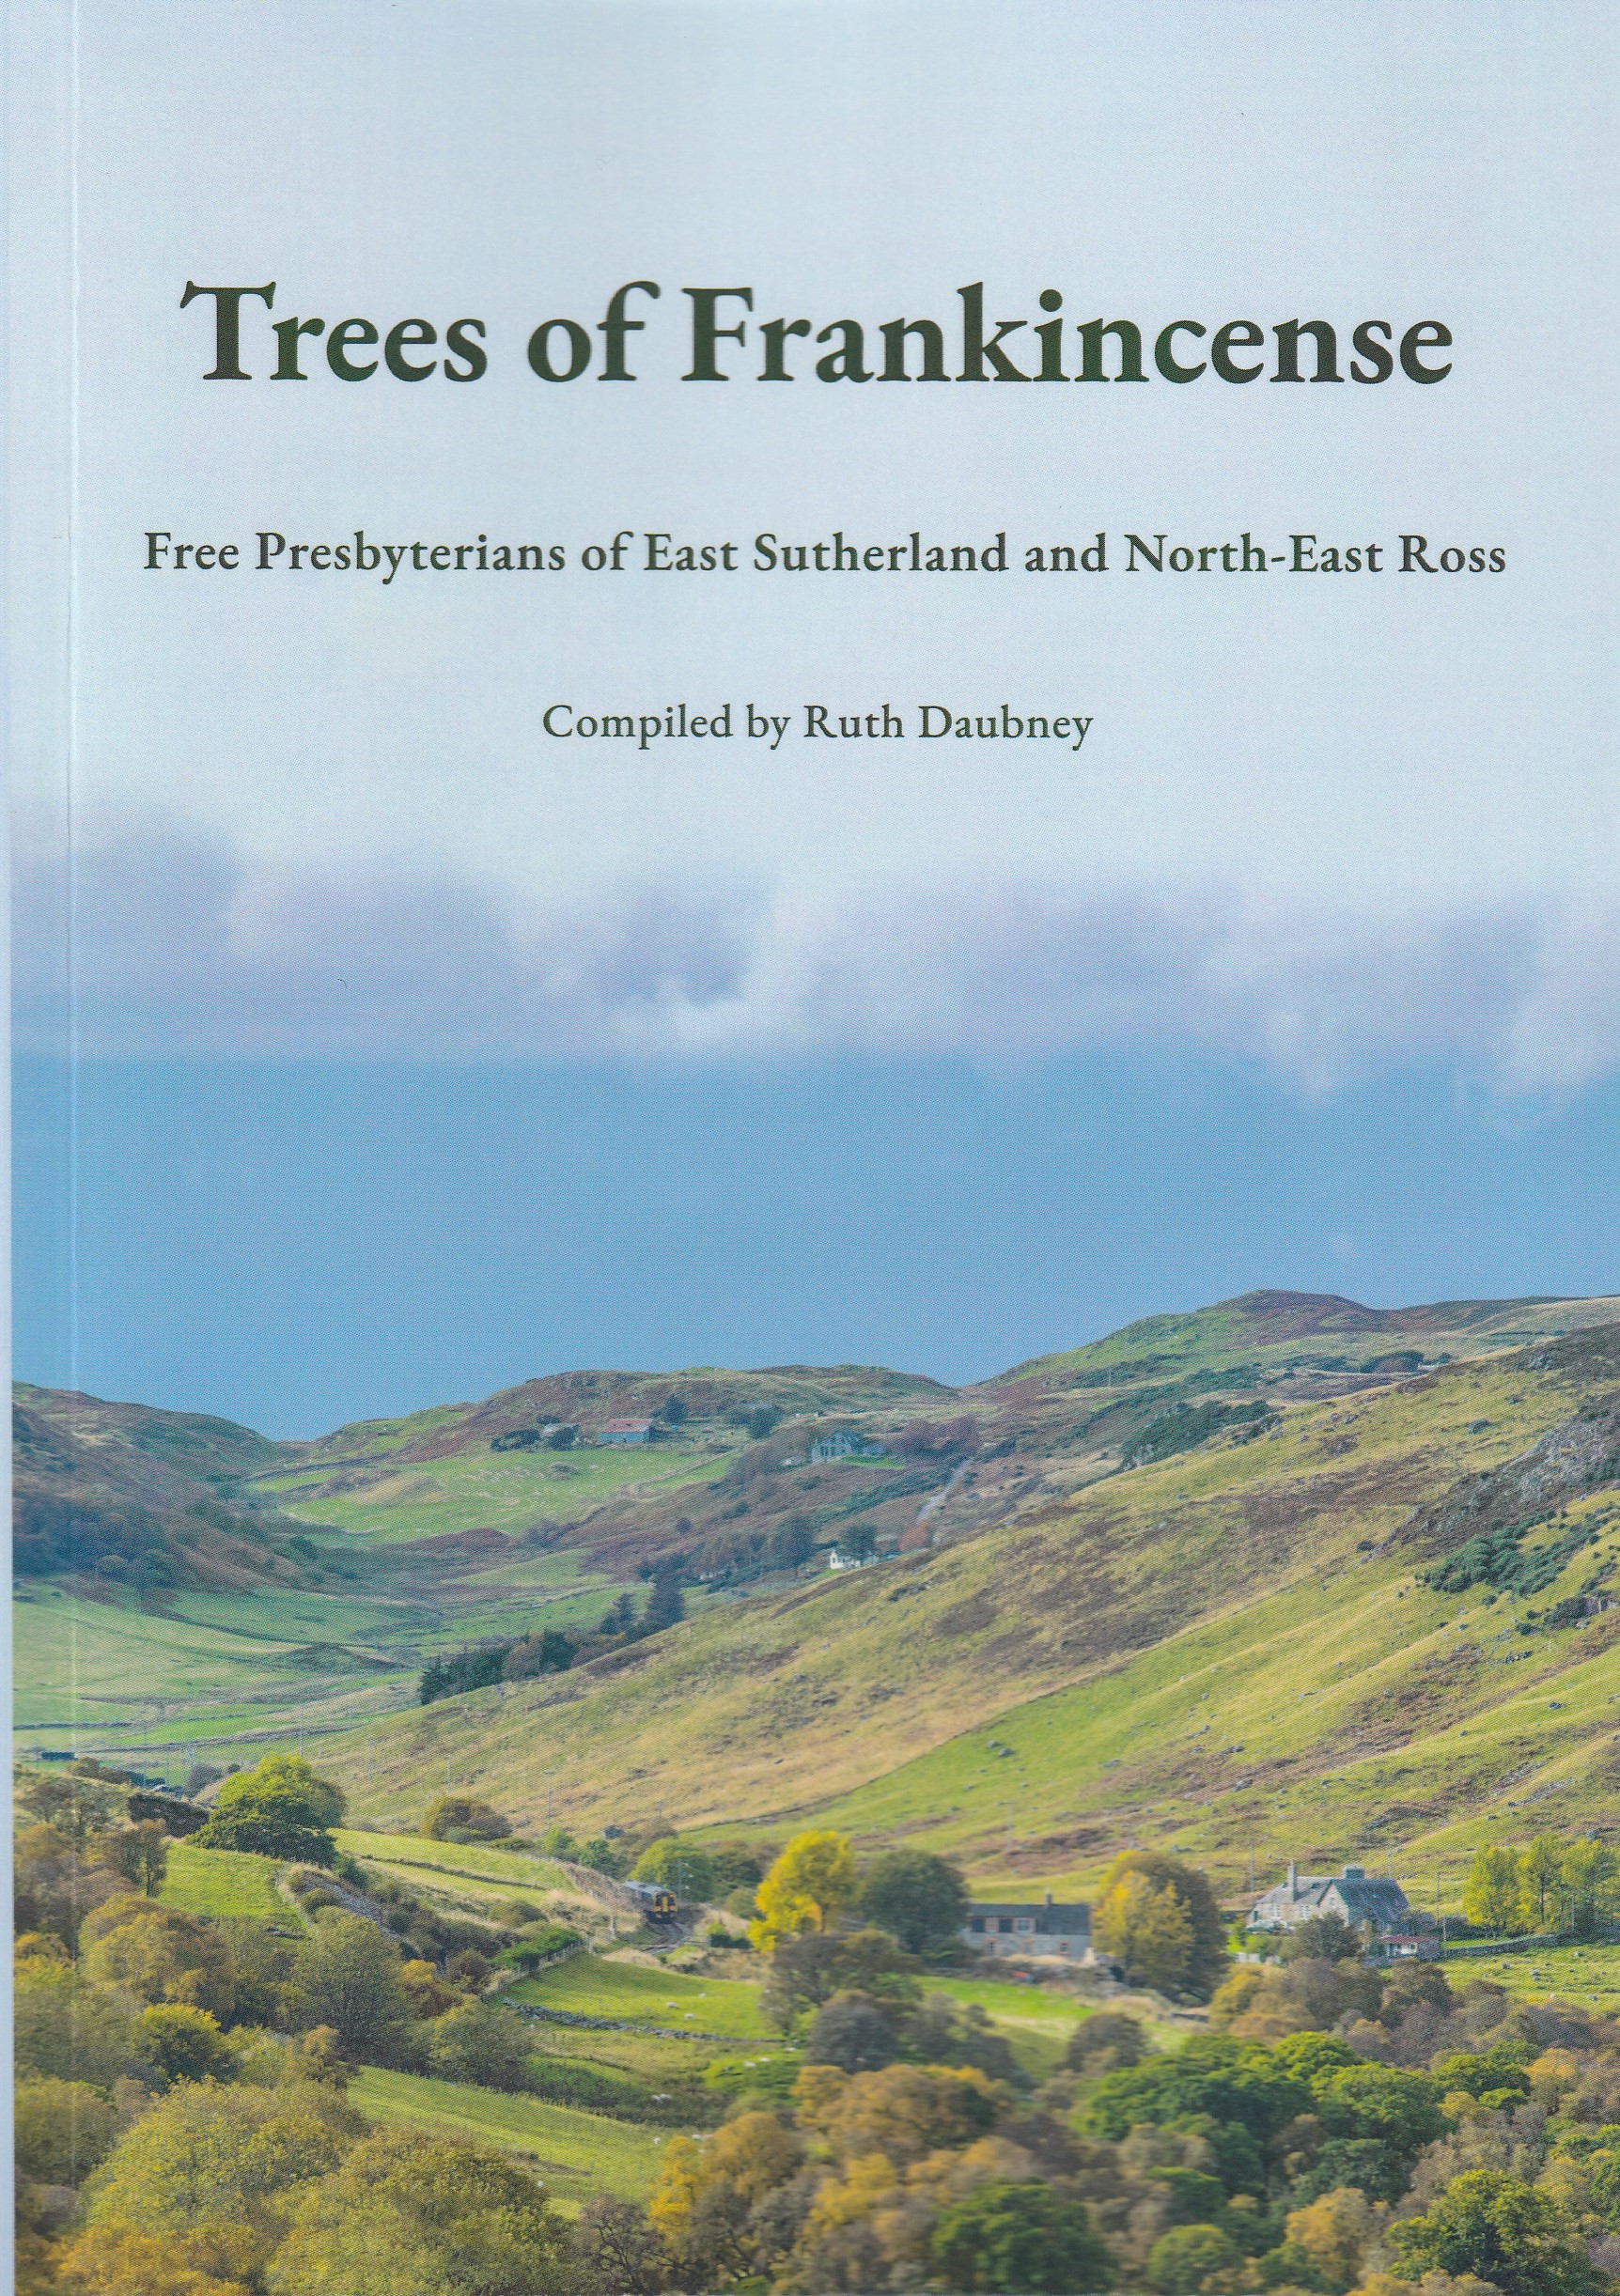 Trees of Frankincense: Free Presbyterians of East Sutherland and North-East Ross (paperback)